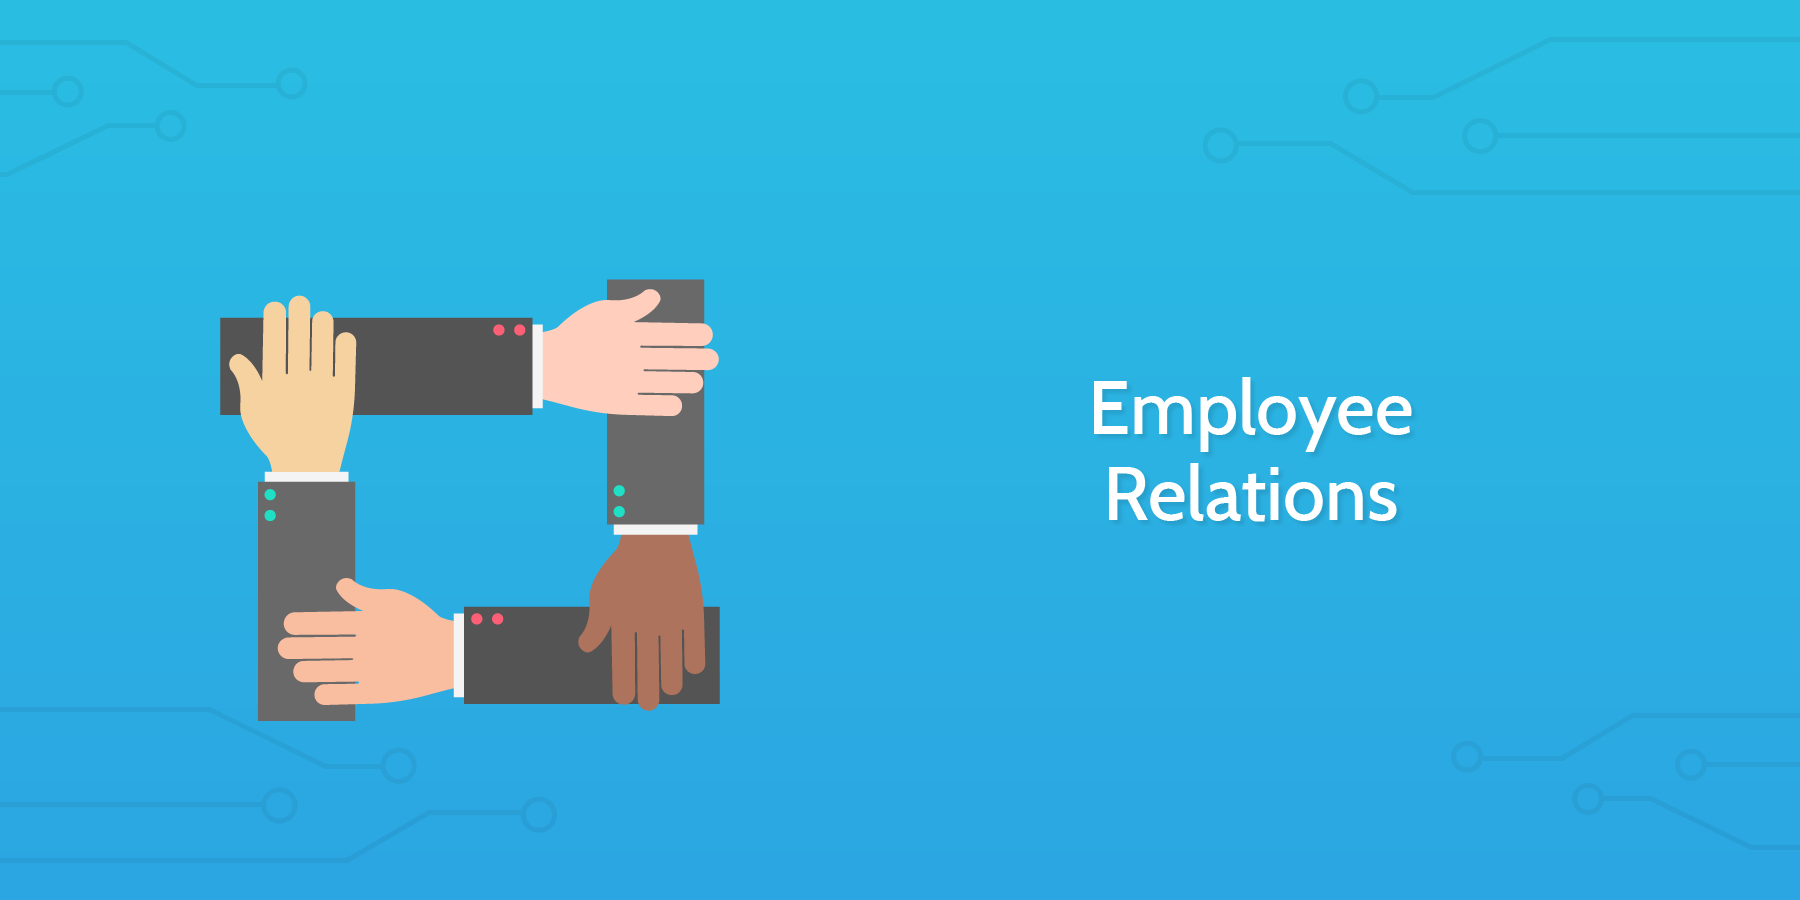 Employee Relations - introduction